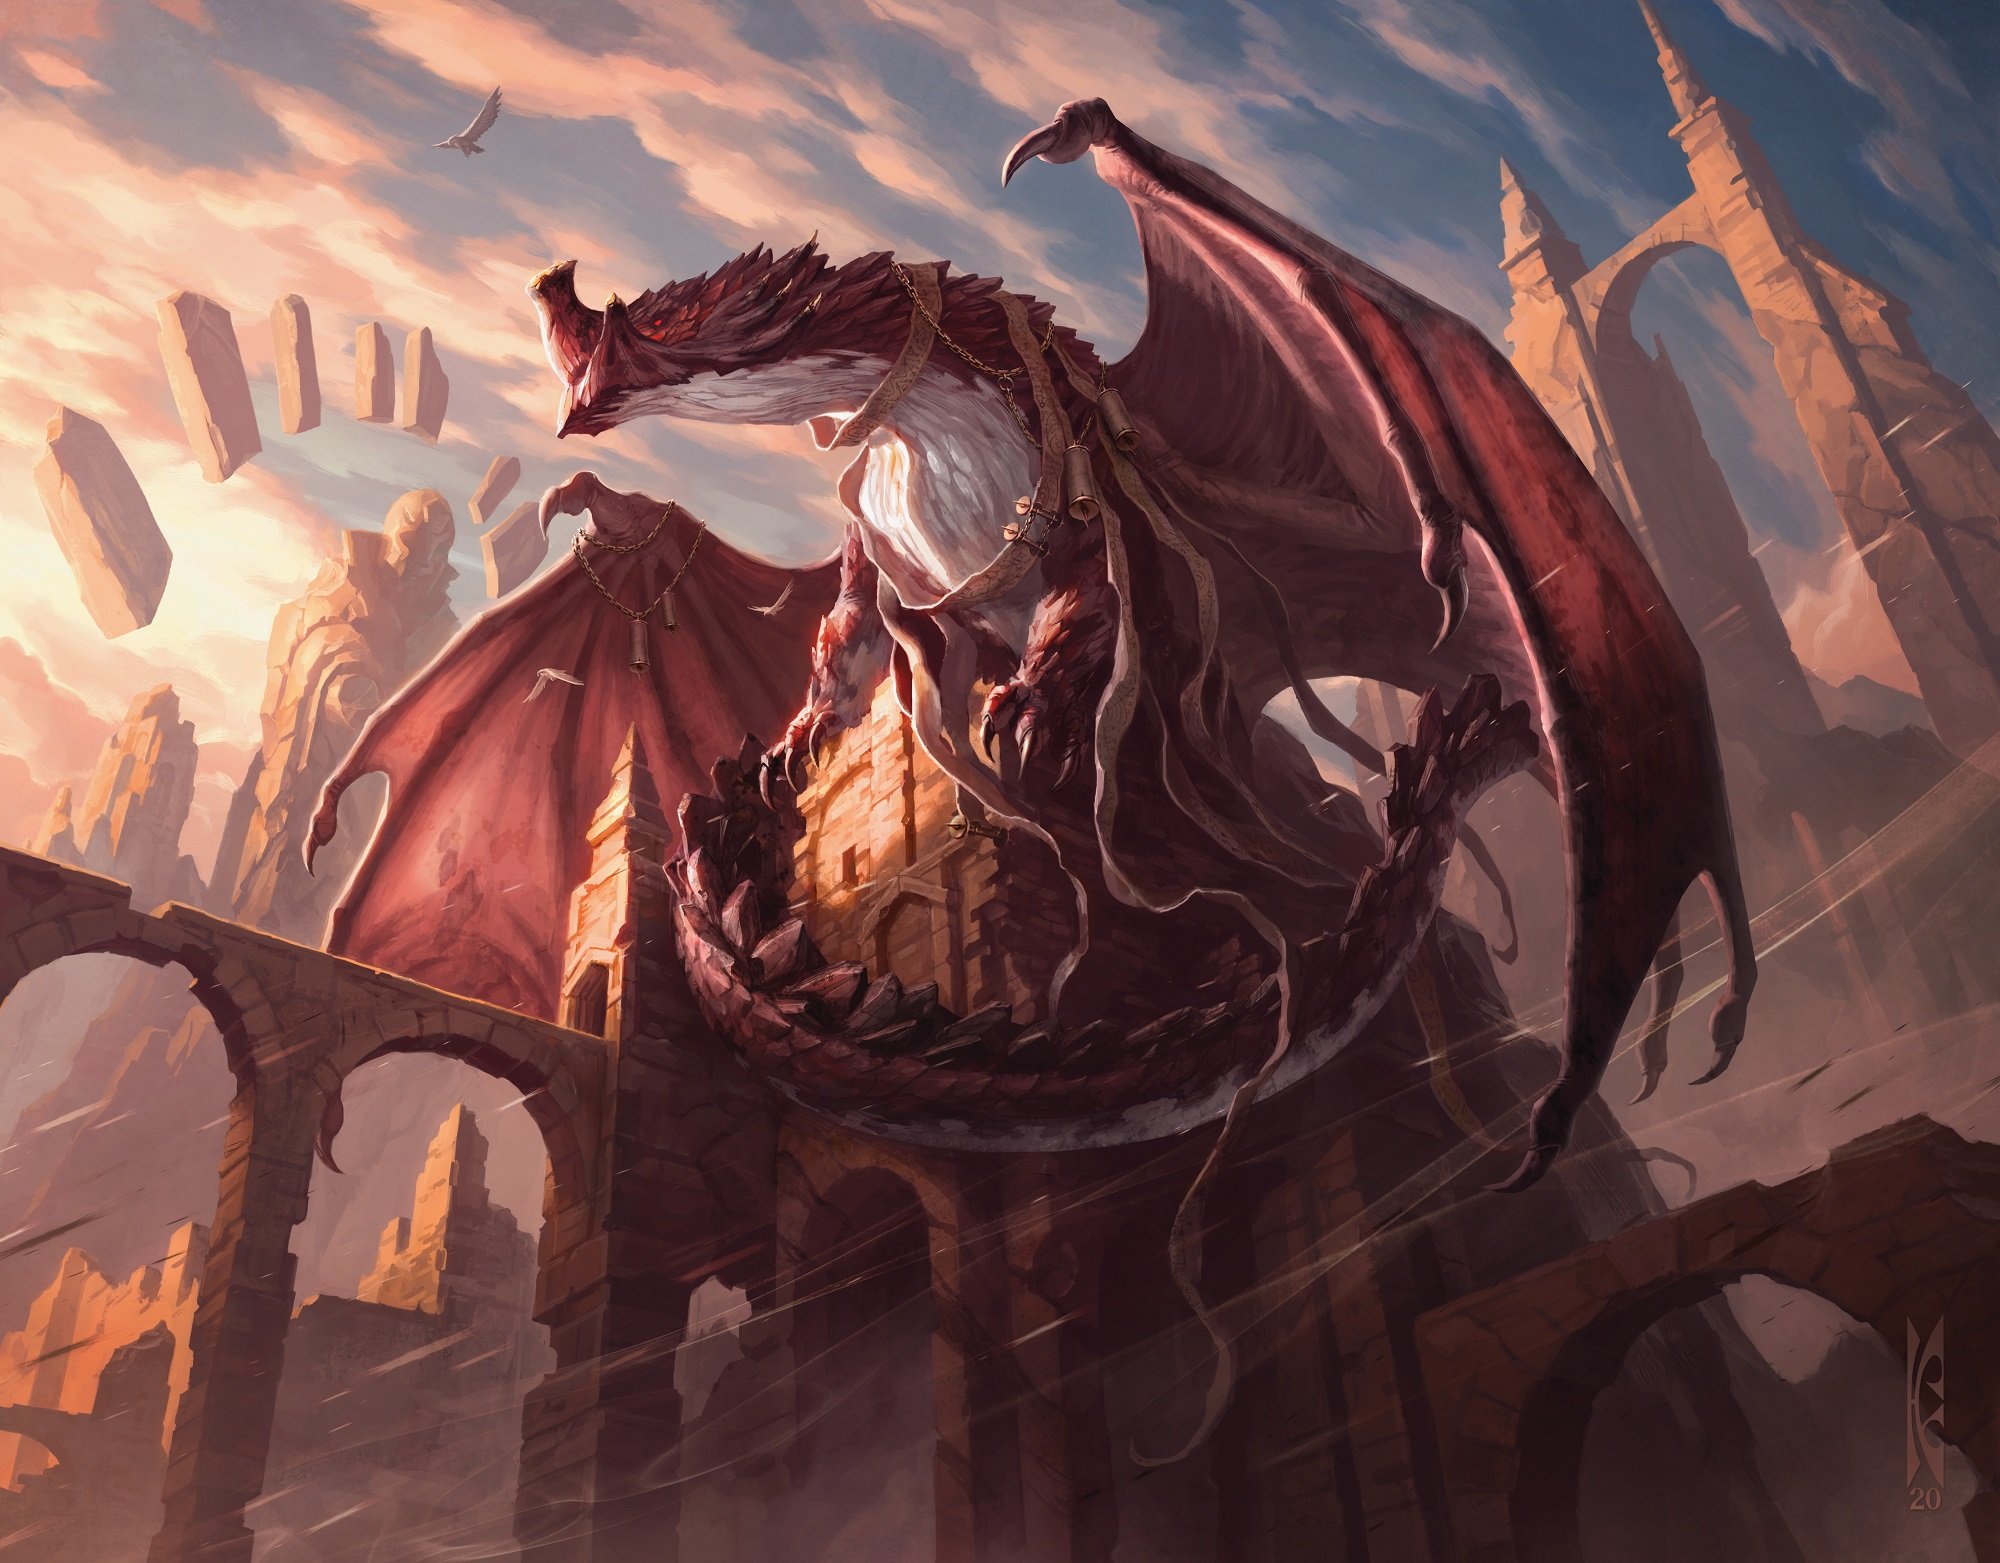 Top 5 Awesome and Powerful Standard Decks You Probably Don't Know Exis...